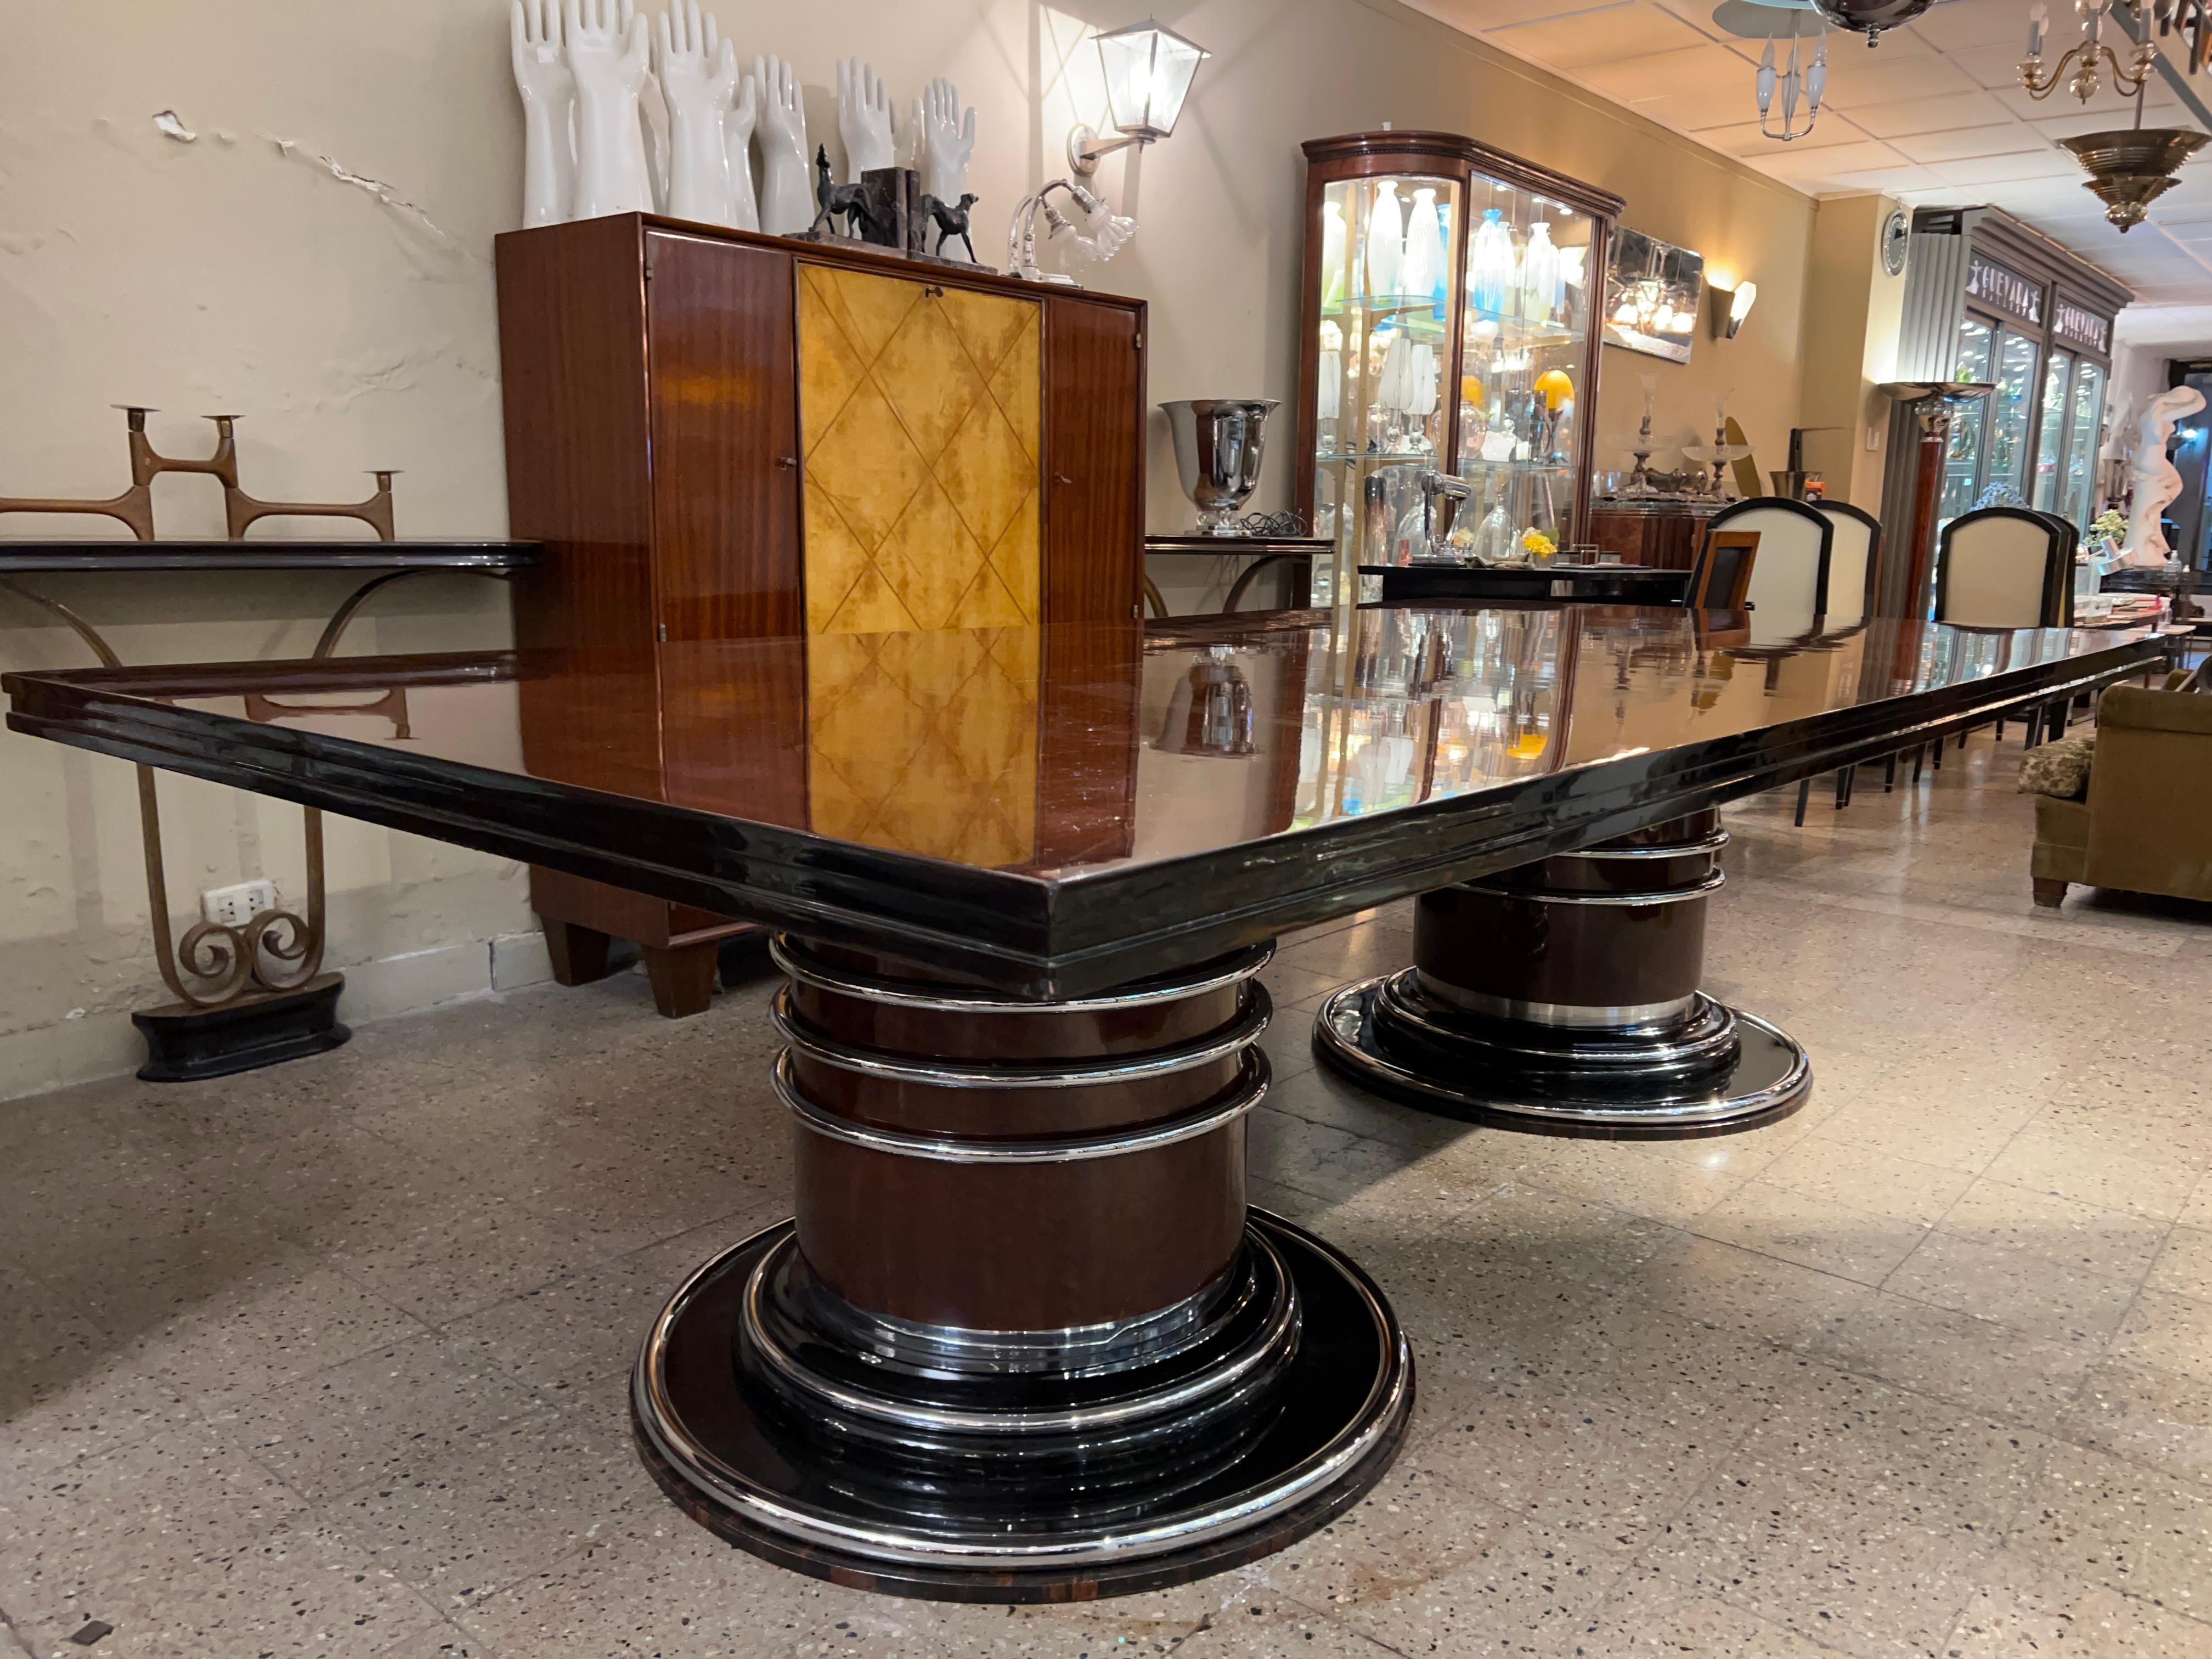 Amaizing Art Deco Table, '12 Persons', 1920, France in Chrome Steel and Wood For Sale 6